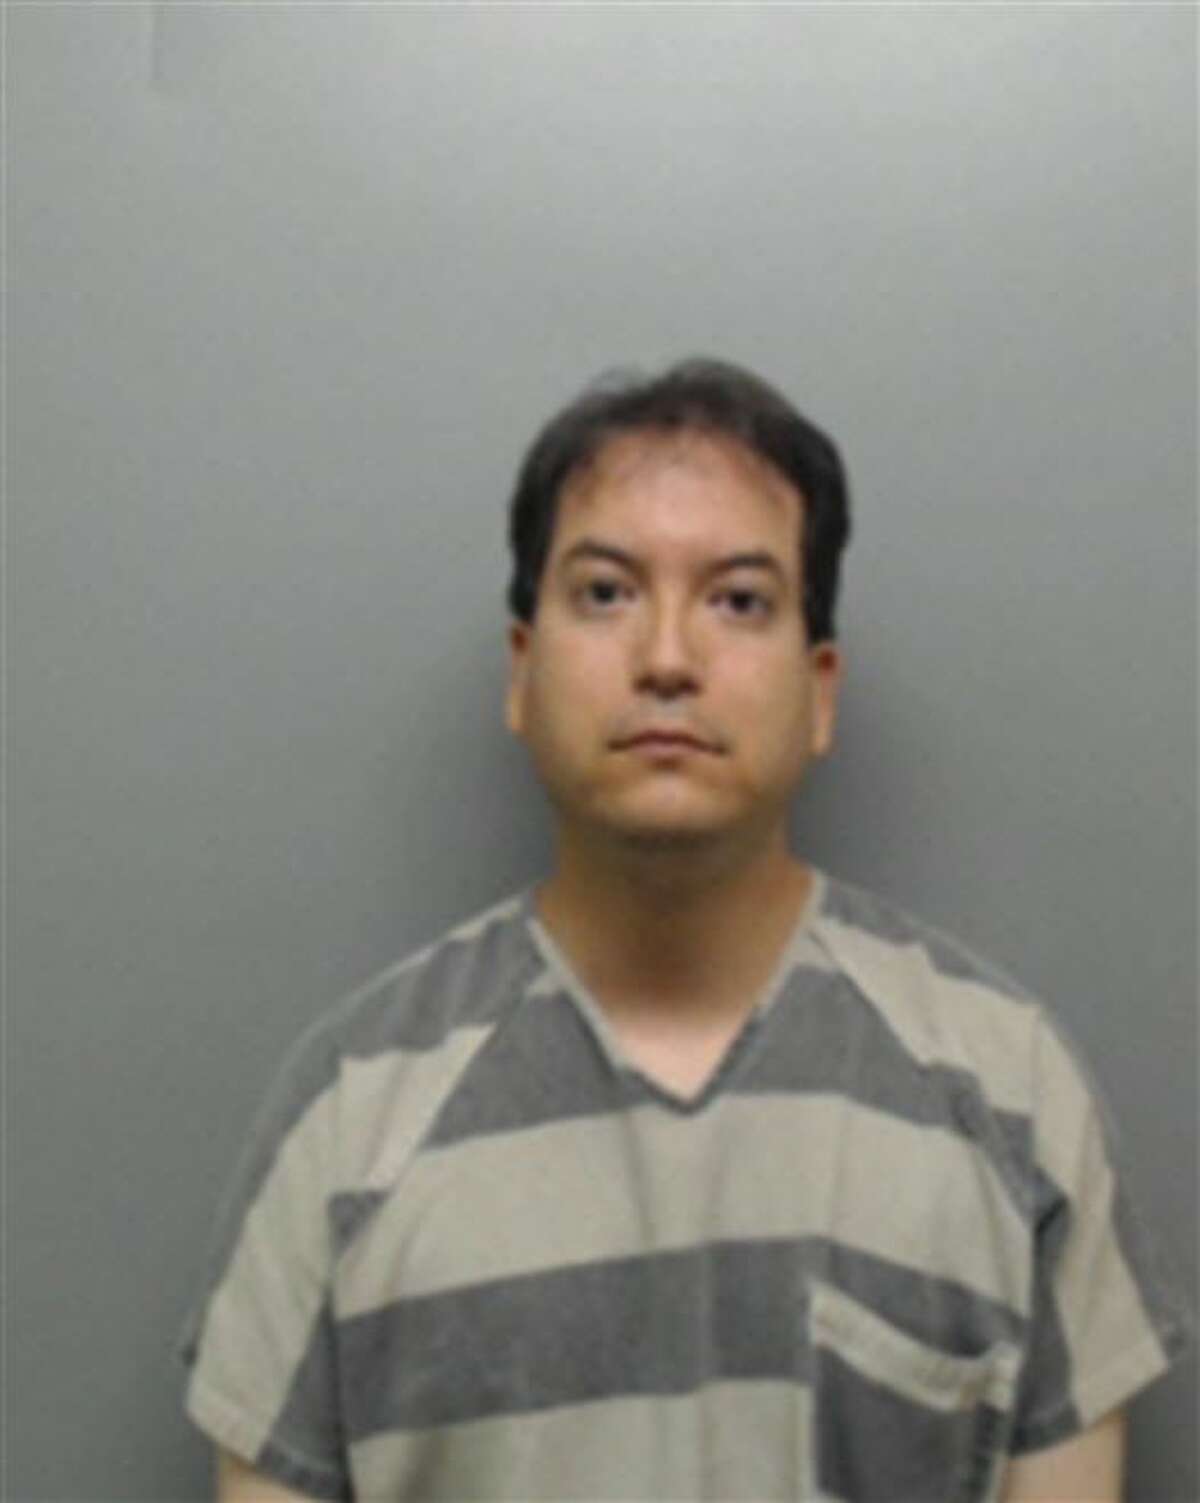 Eduardo Mata, 35, was charged with aggravated assault with a firearm.